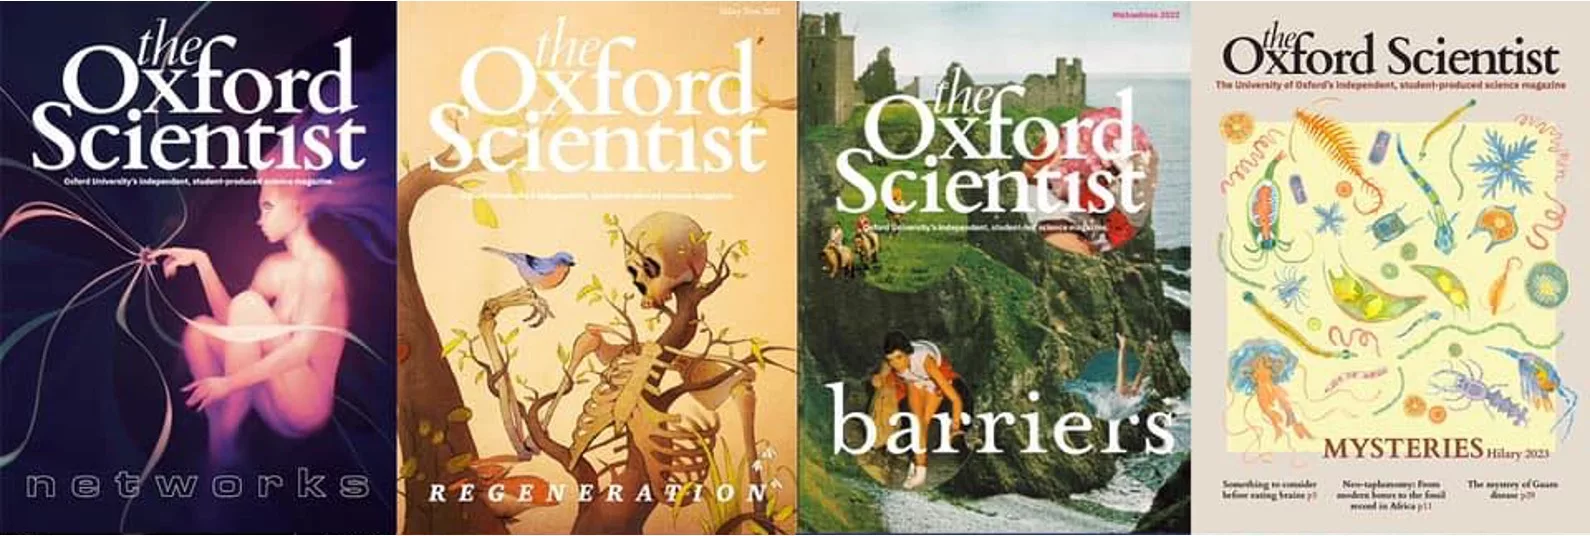 Past Print issues of the Oxford Scientist